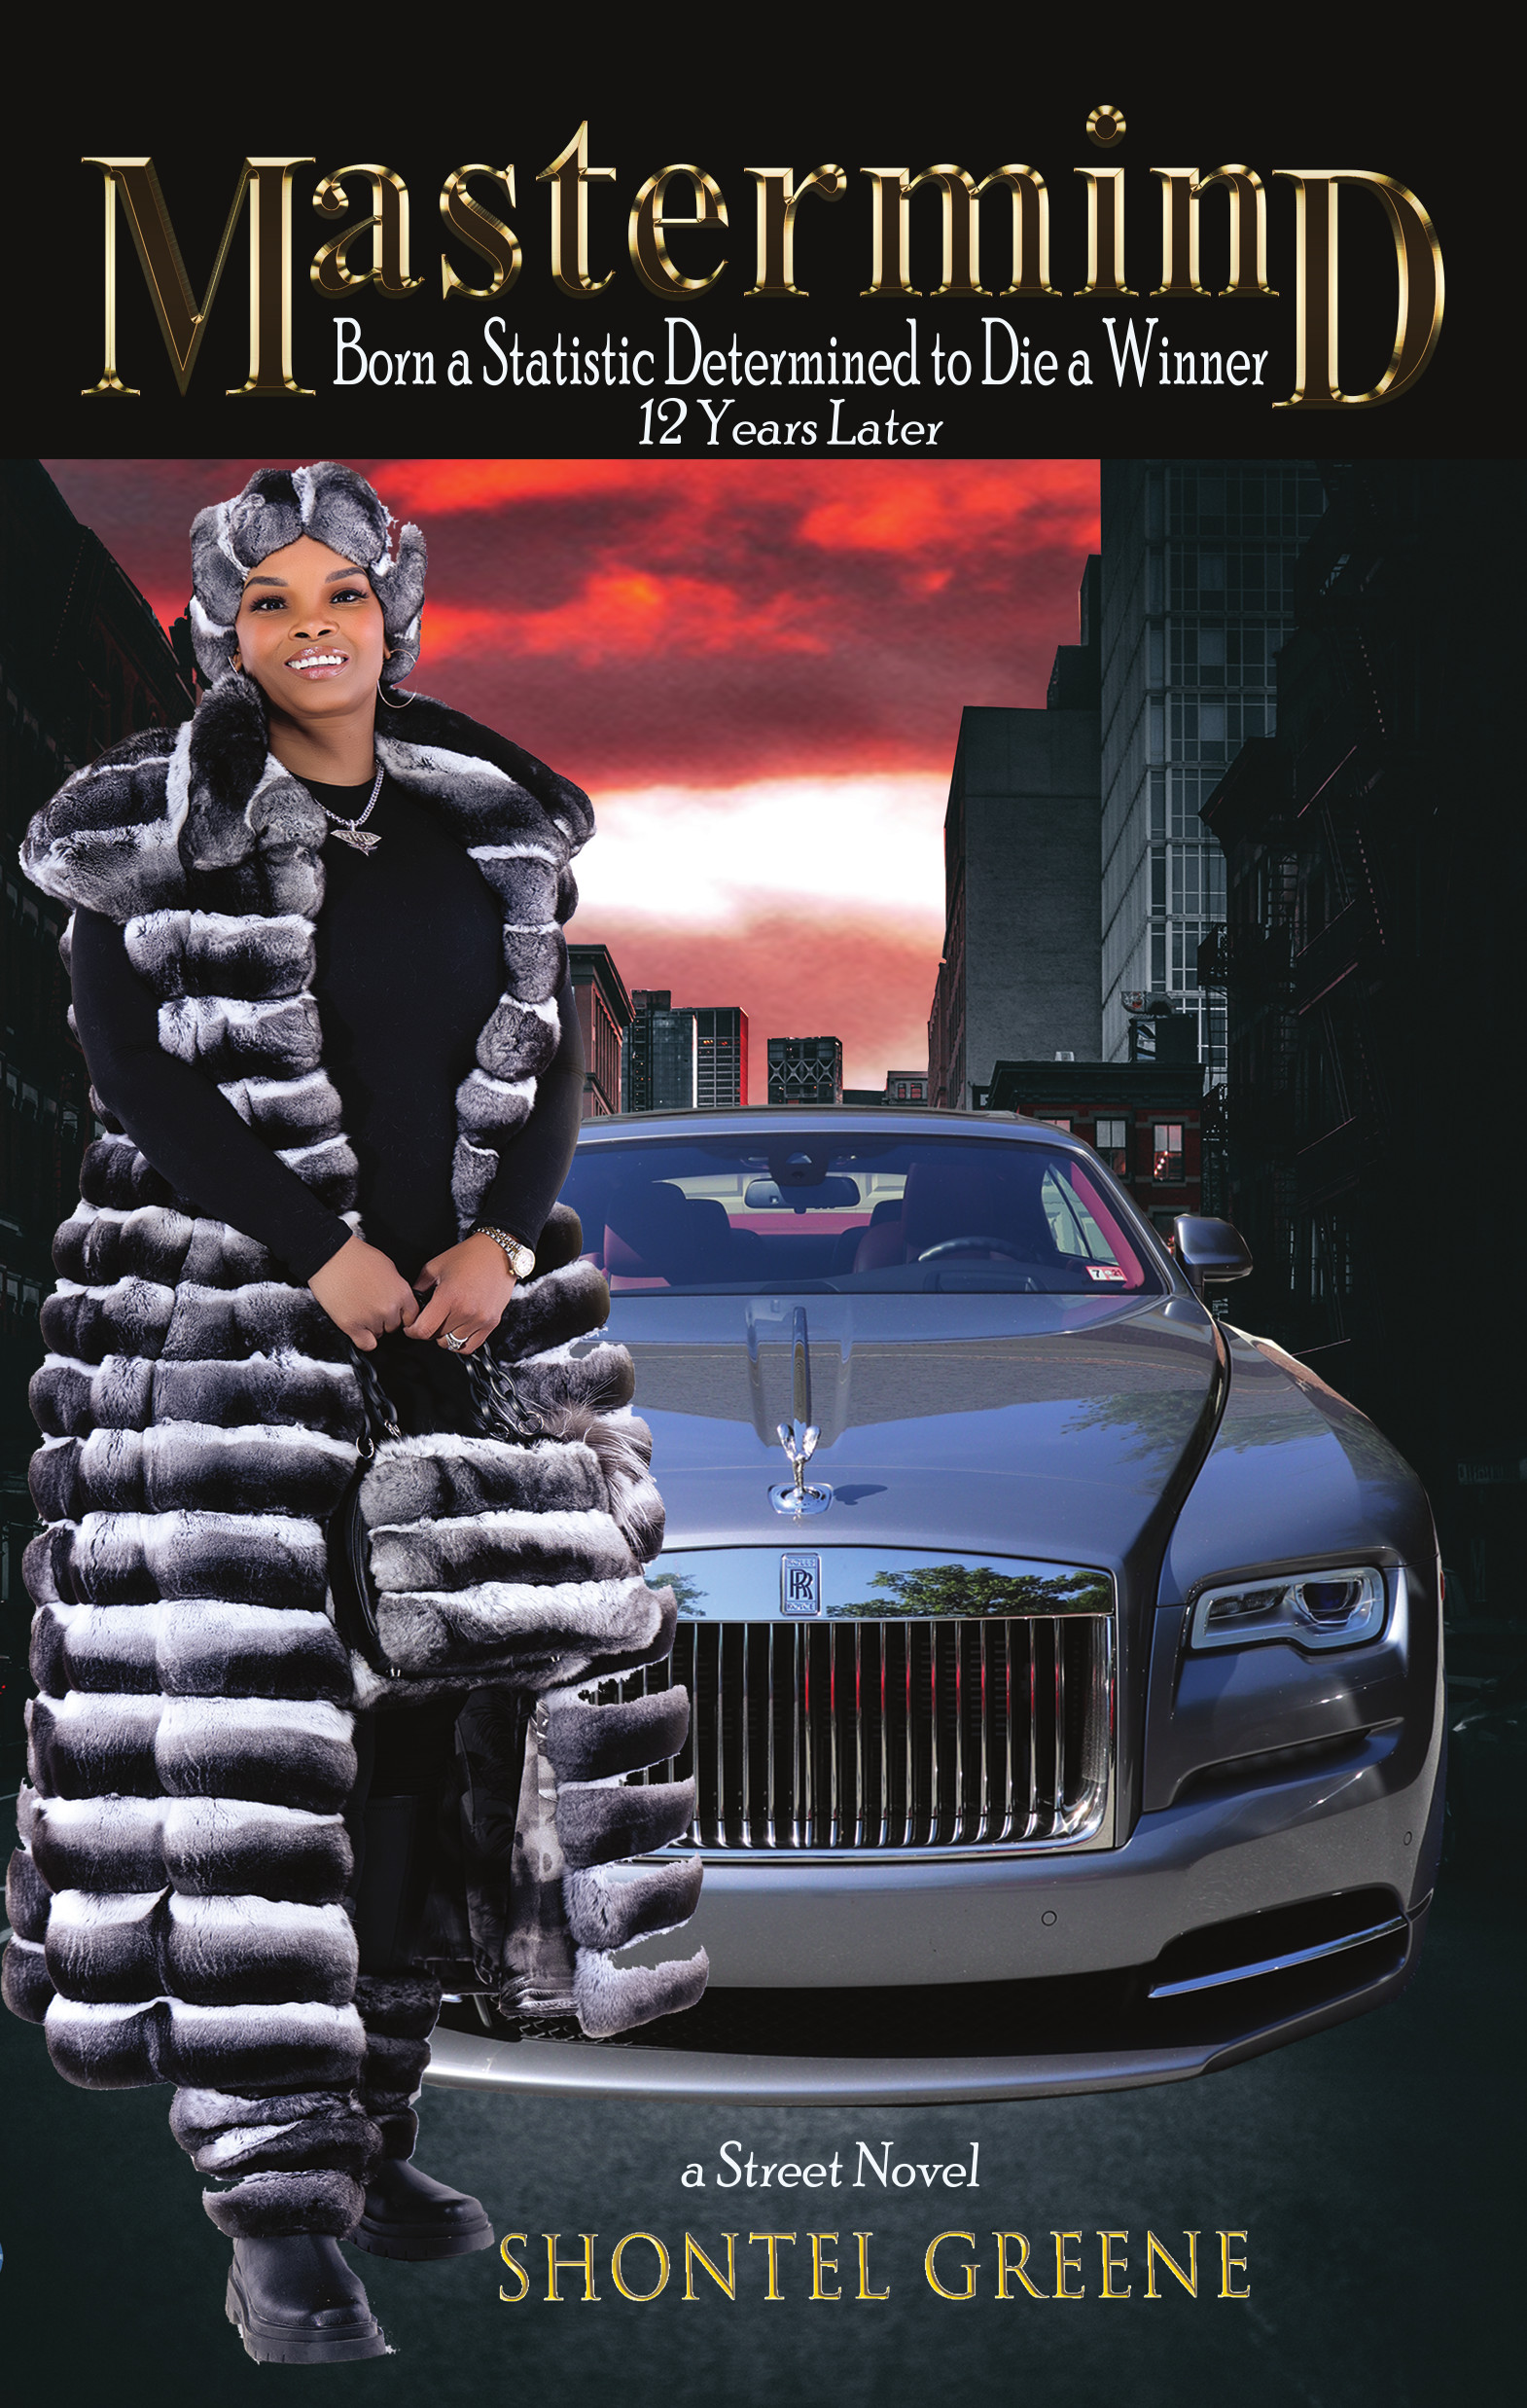 Shontel Greene Releases Her New Book - Mastermind: Born a Statistic, Determined to Die a Winner... 12 Years Later